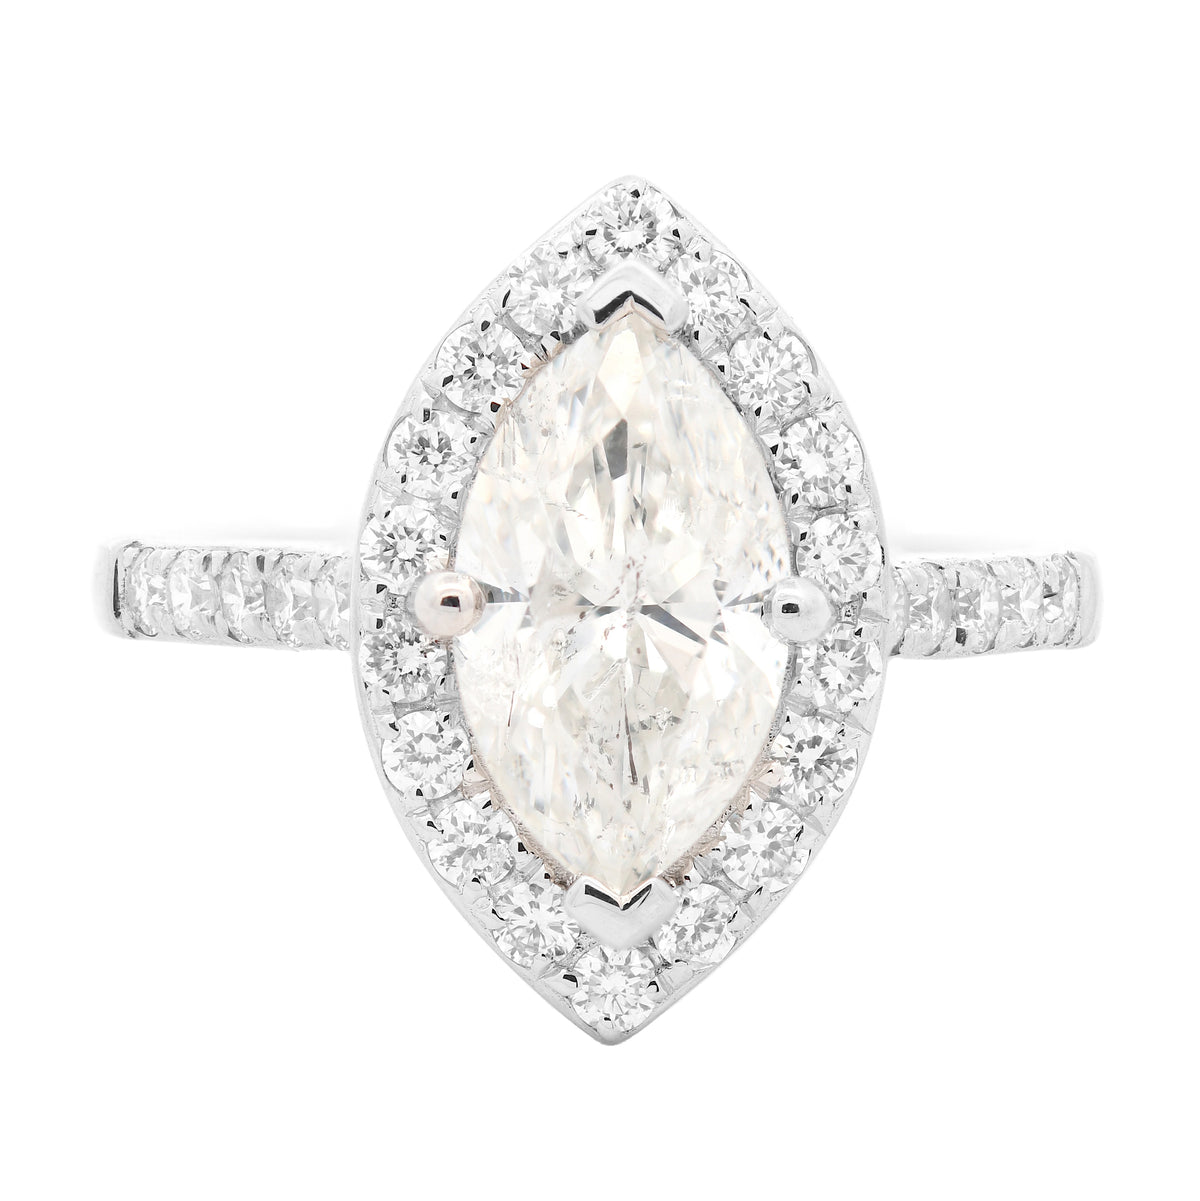 Halo Unique Ring Marquise Shape 1.51 ct with Diamonds on the Sides 0.50 in Platinum 950 WGI Certified